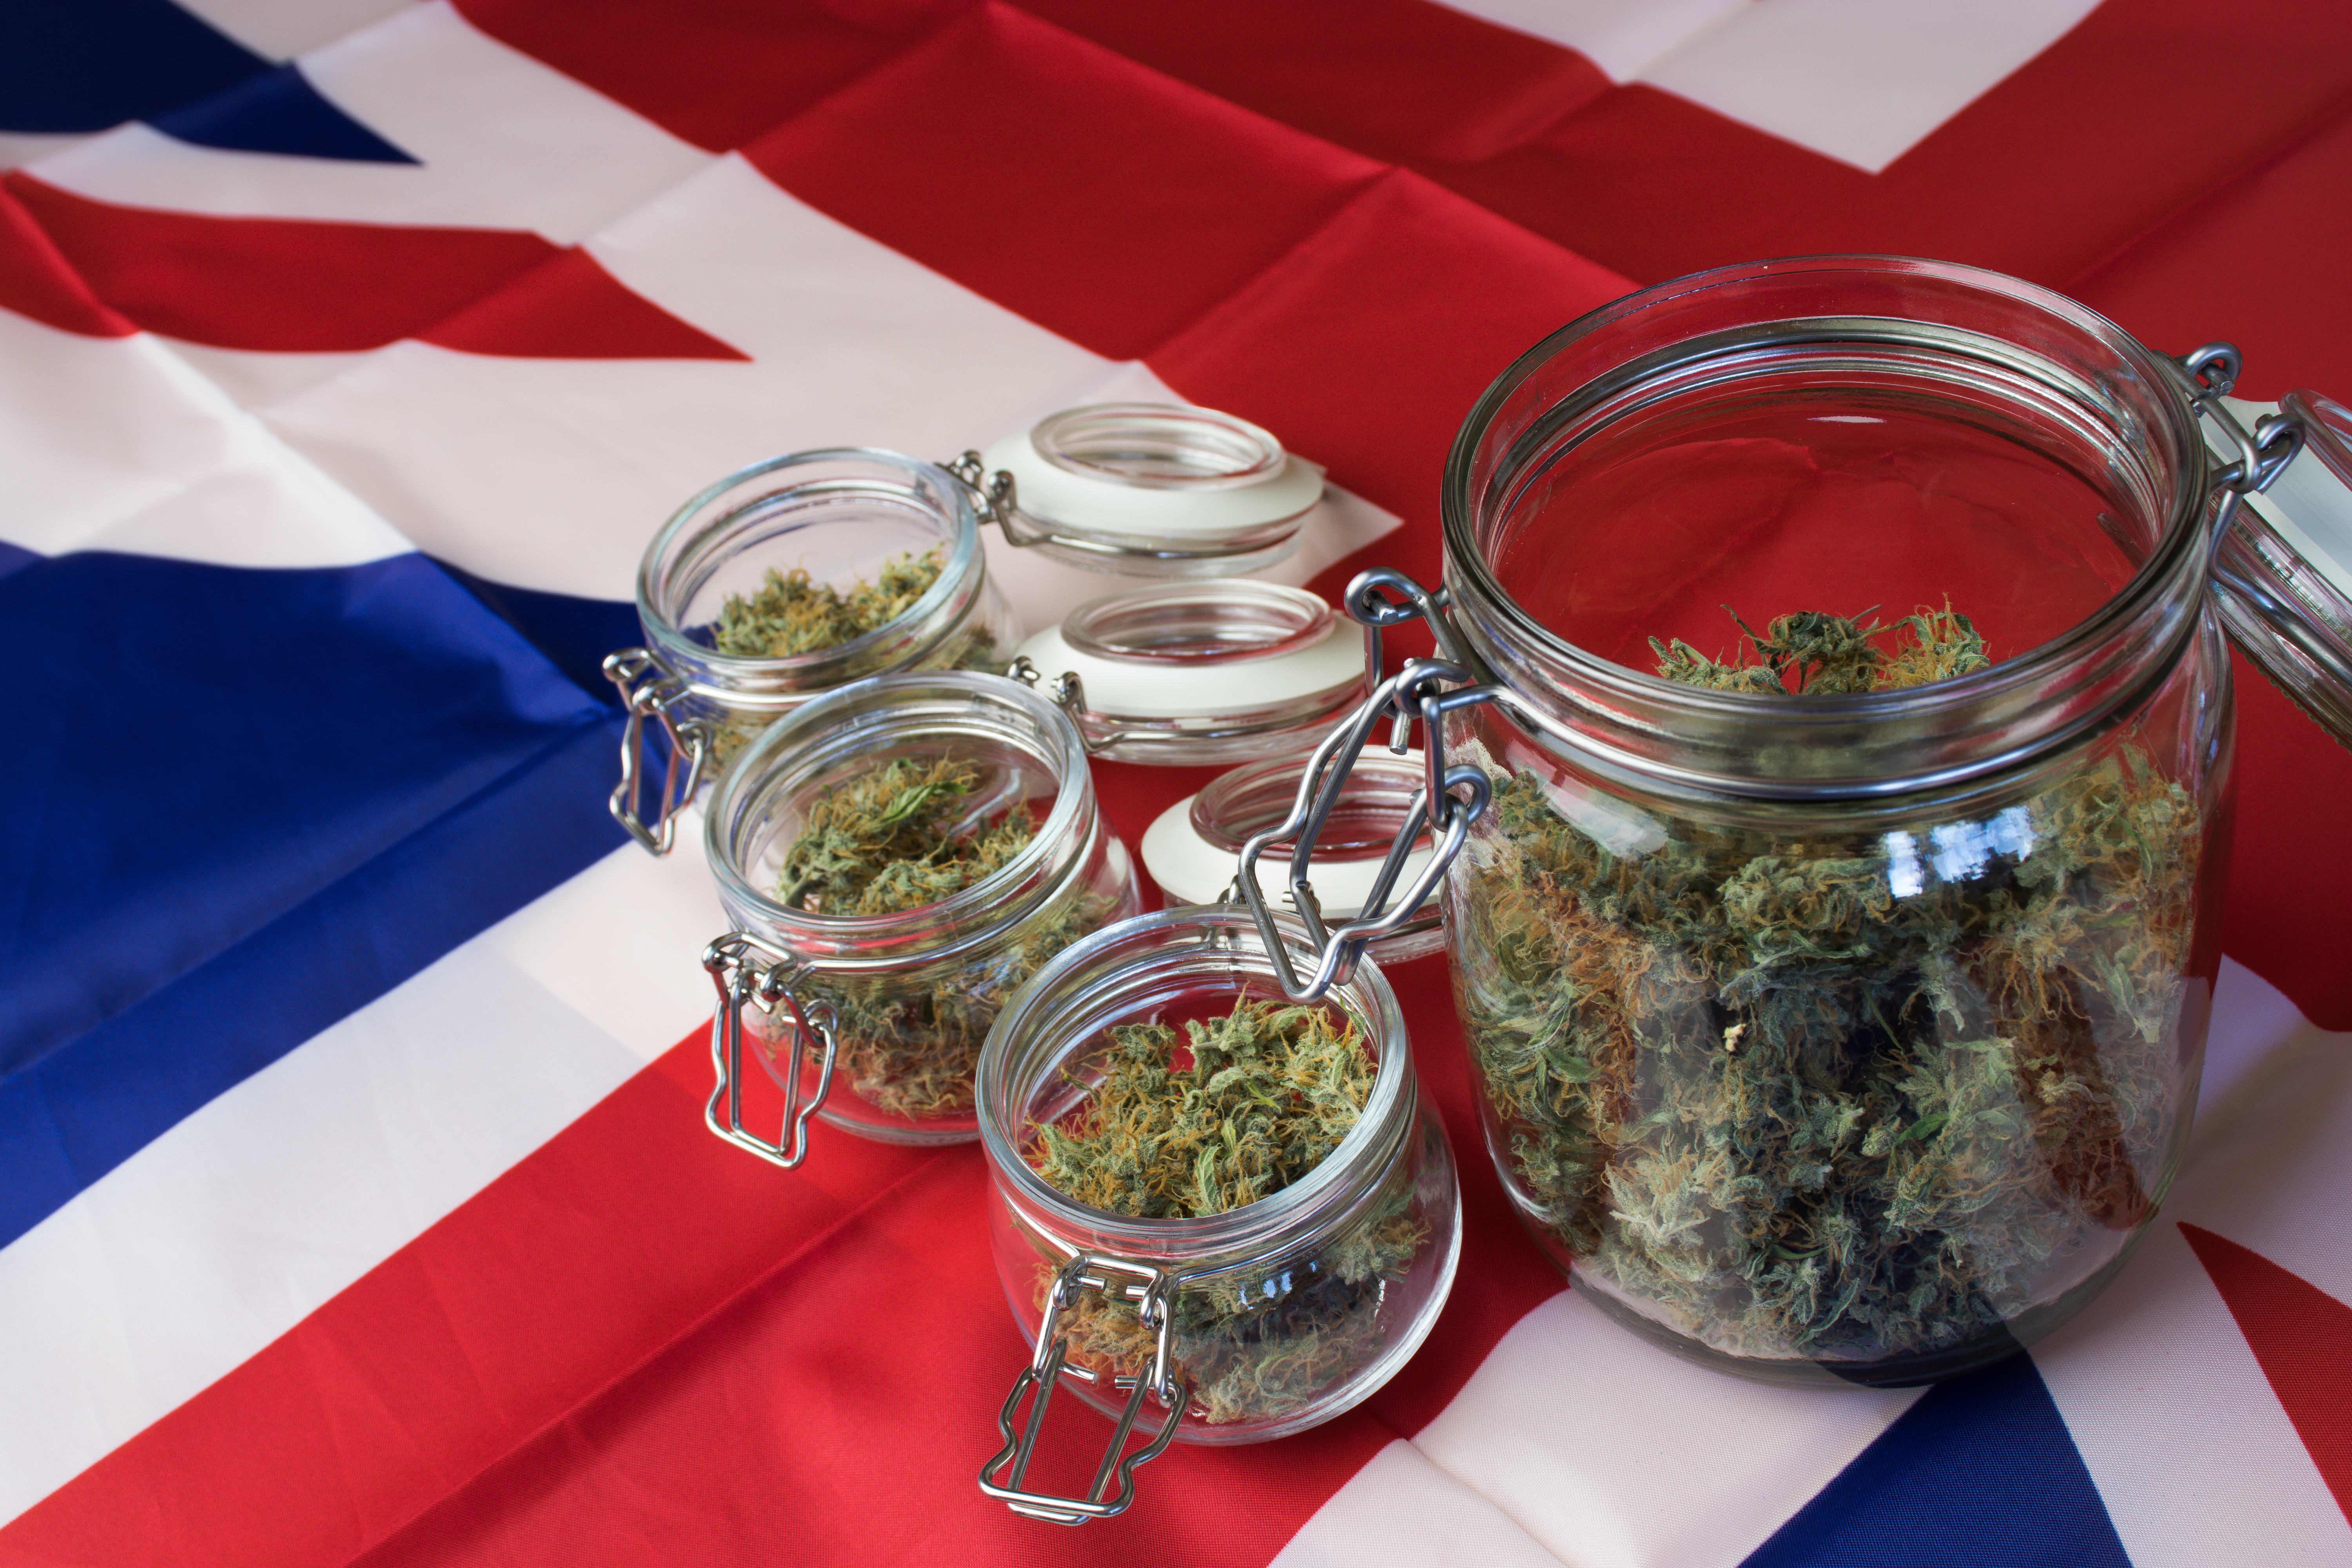 Jars of cannabis sit open on top of UK flag.